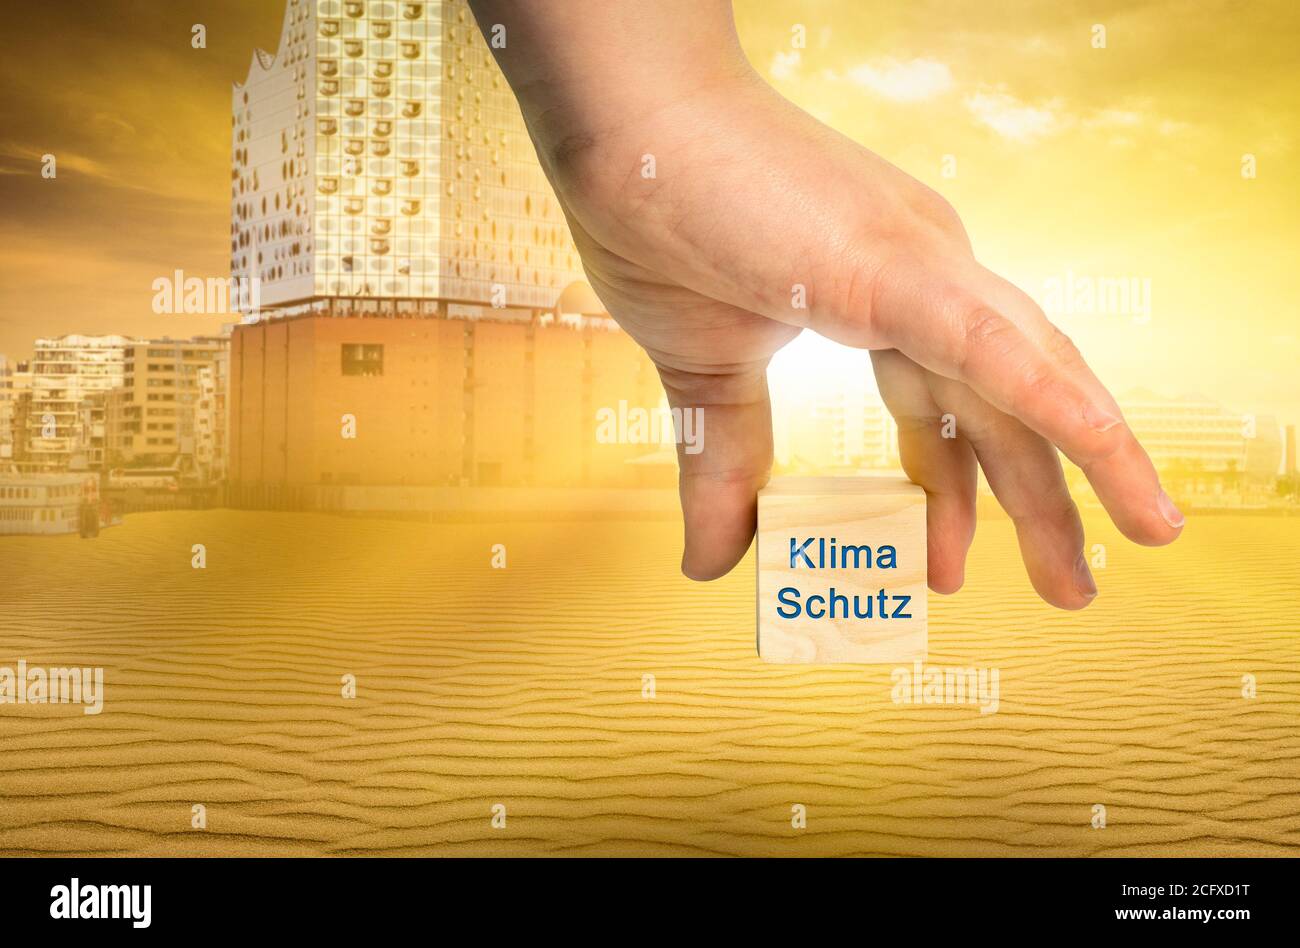 climate protection based on an abstract image of Hamburg represented with a cube with the German inscription climate protection Stock Photo